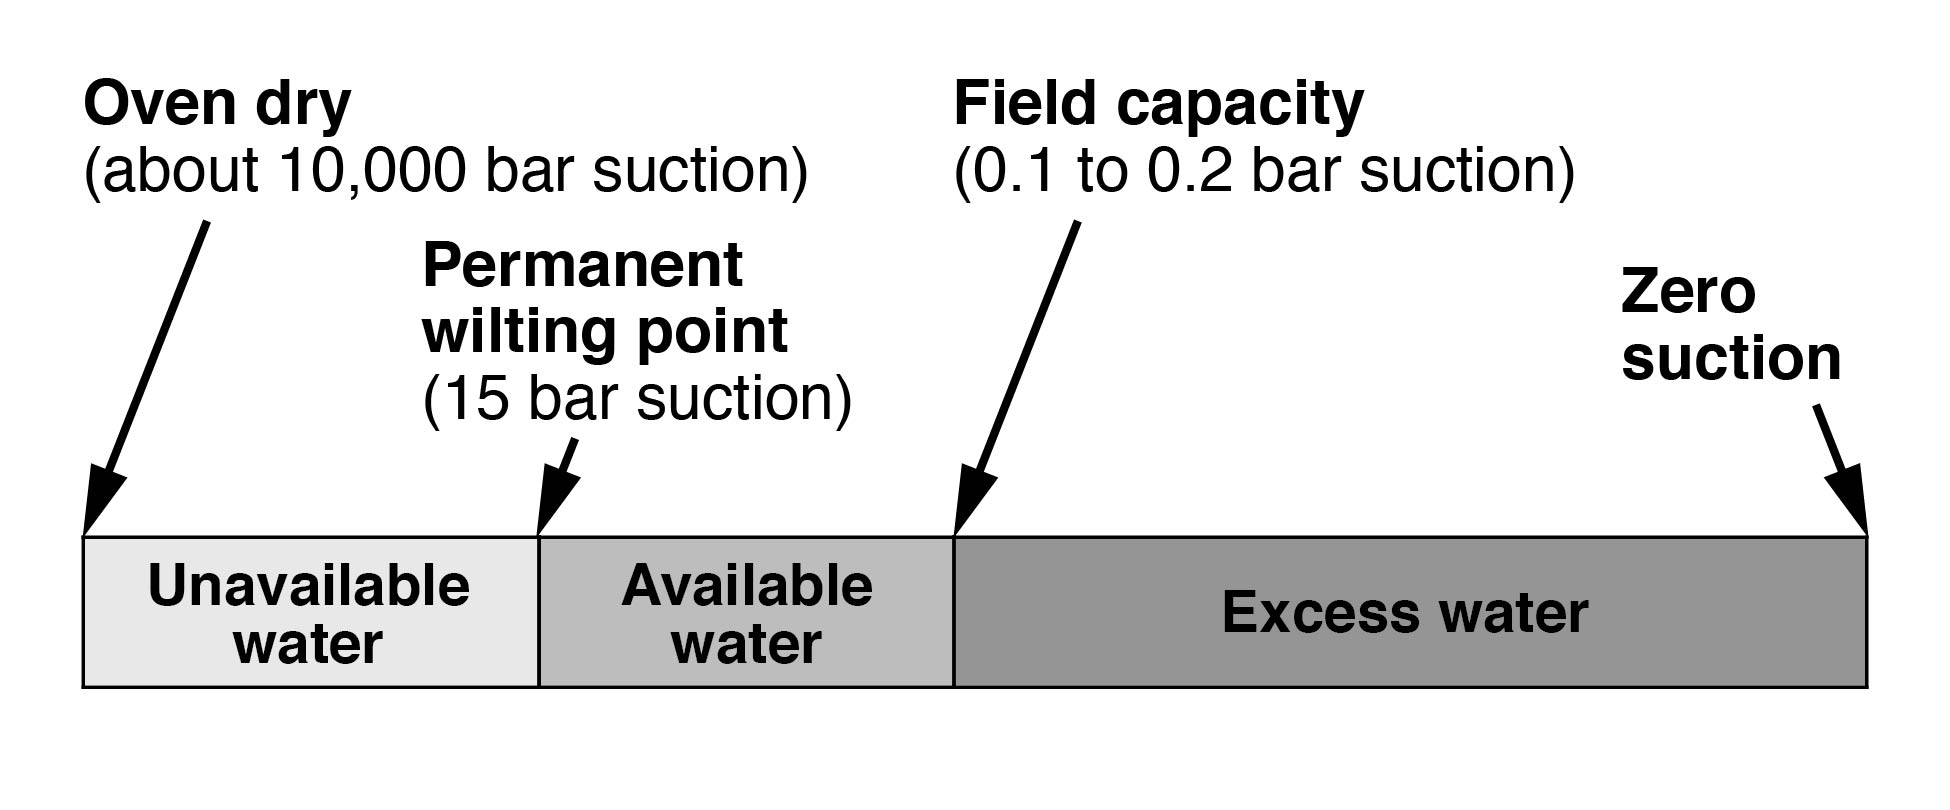 Drawing of soil water demonstrating only a portion is available for plant uptake. Unavailable water: Oven dry (about 10,000 bar suction) to Permanent wilting point (15 bar suction). Available water: Permanent wilting point to Field capacity (0.1 to 0.2 bar suction). Excess water: Field capacity to zero suction.